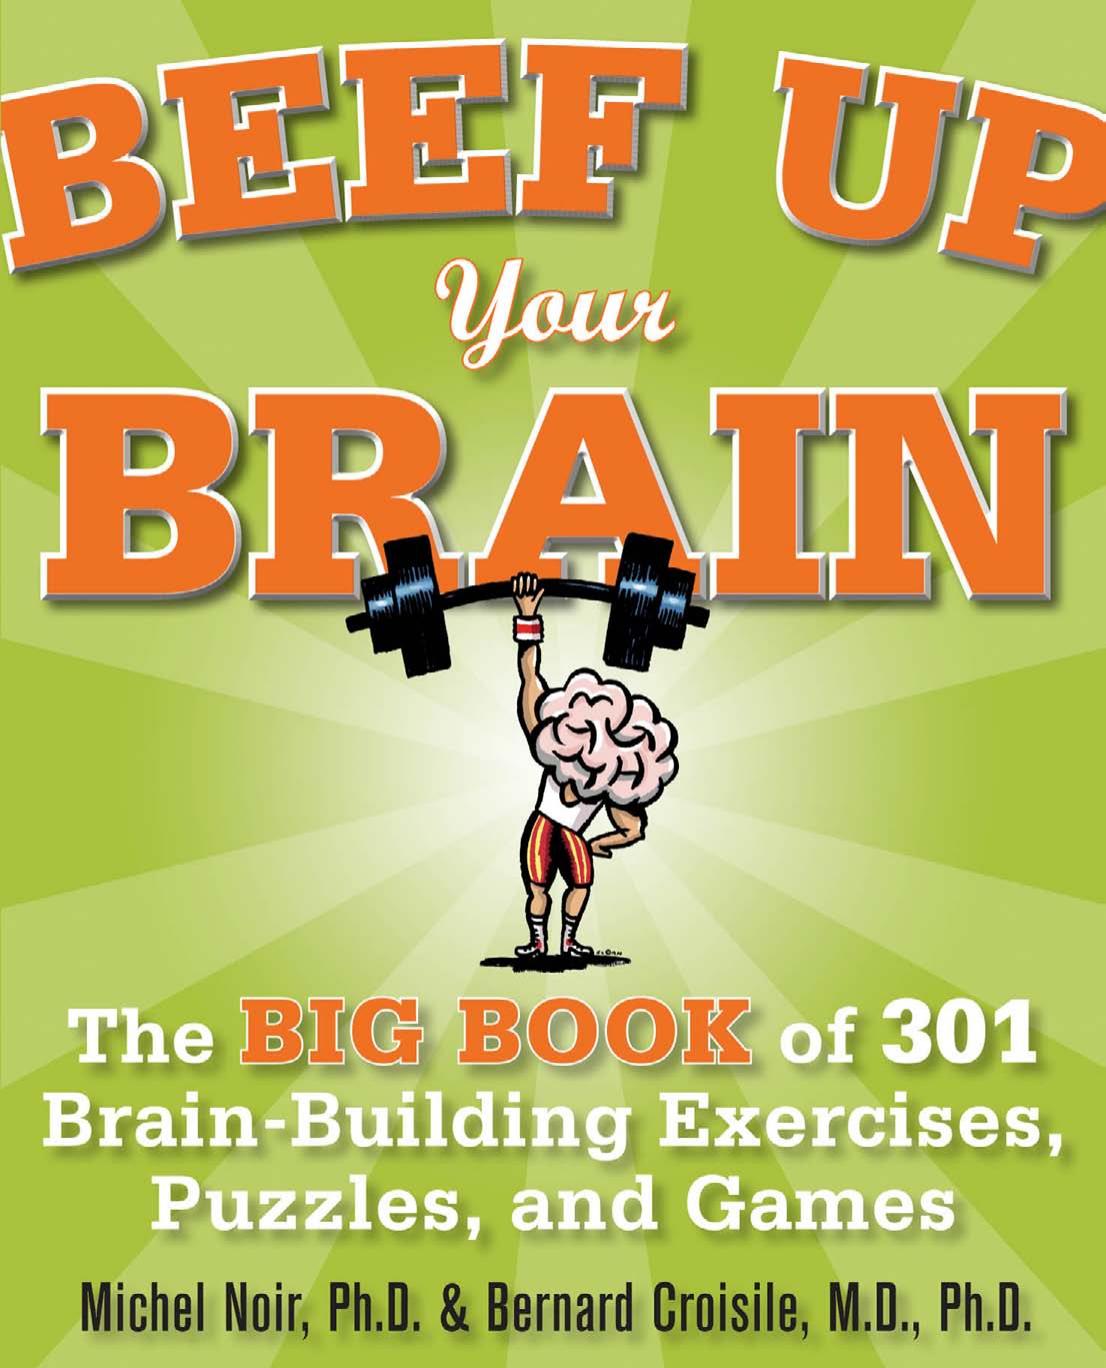 Michel Noir Beef Up Your Brain The Big Book of 301 Brain-Building Exercises, Puzzles and Games! 2009